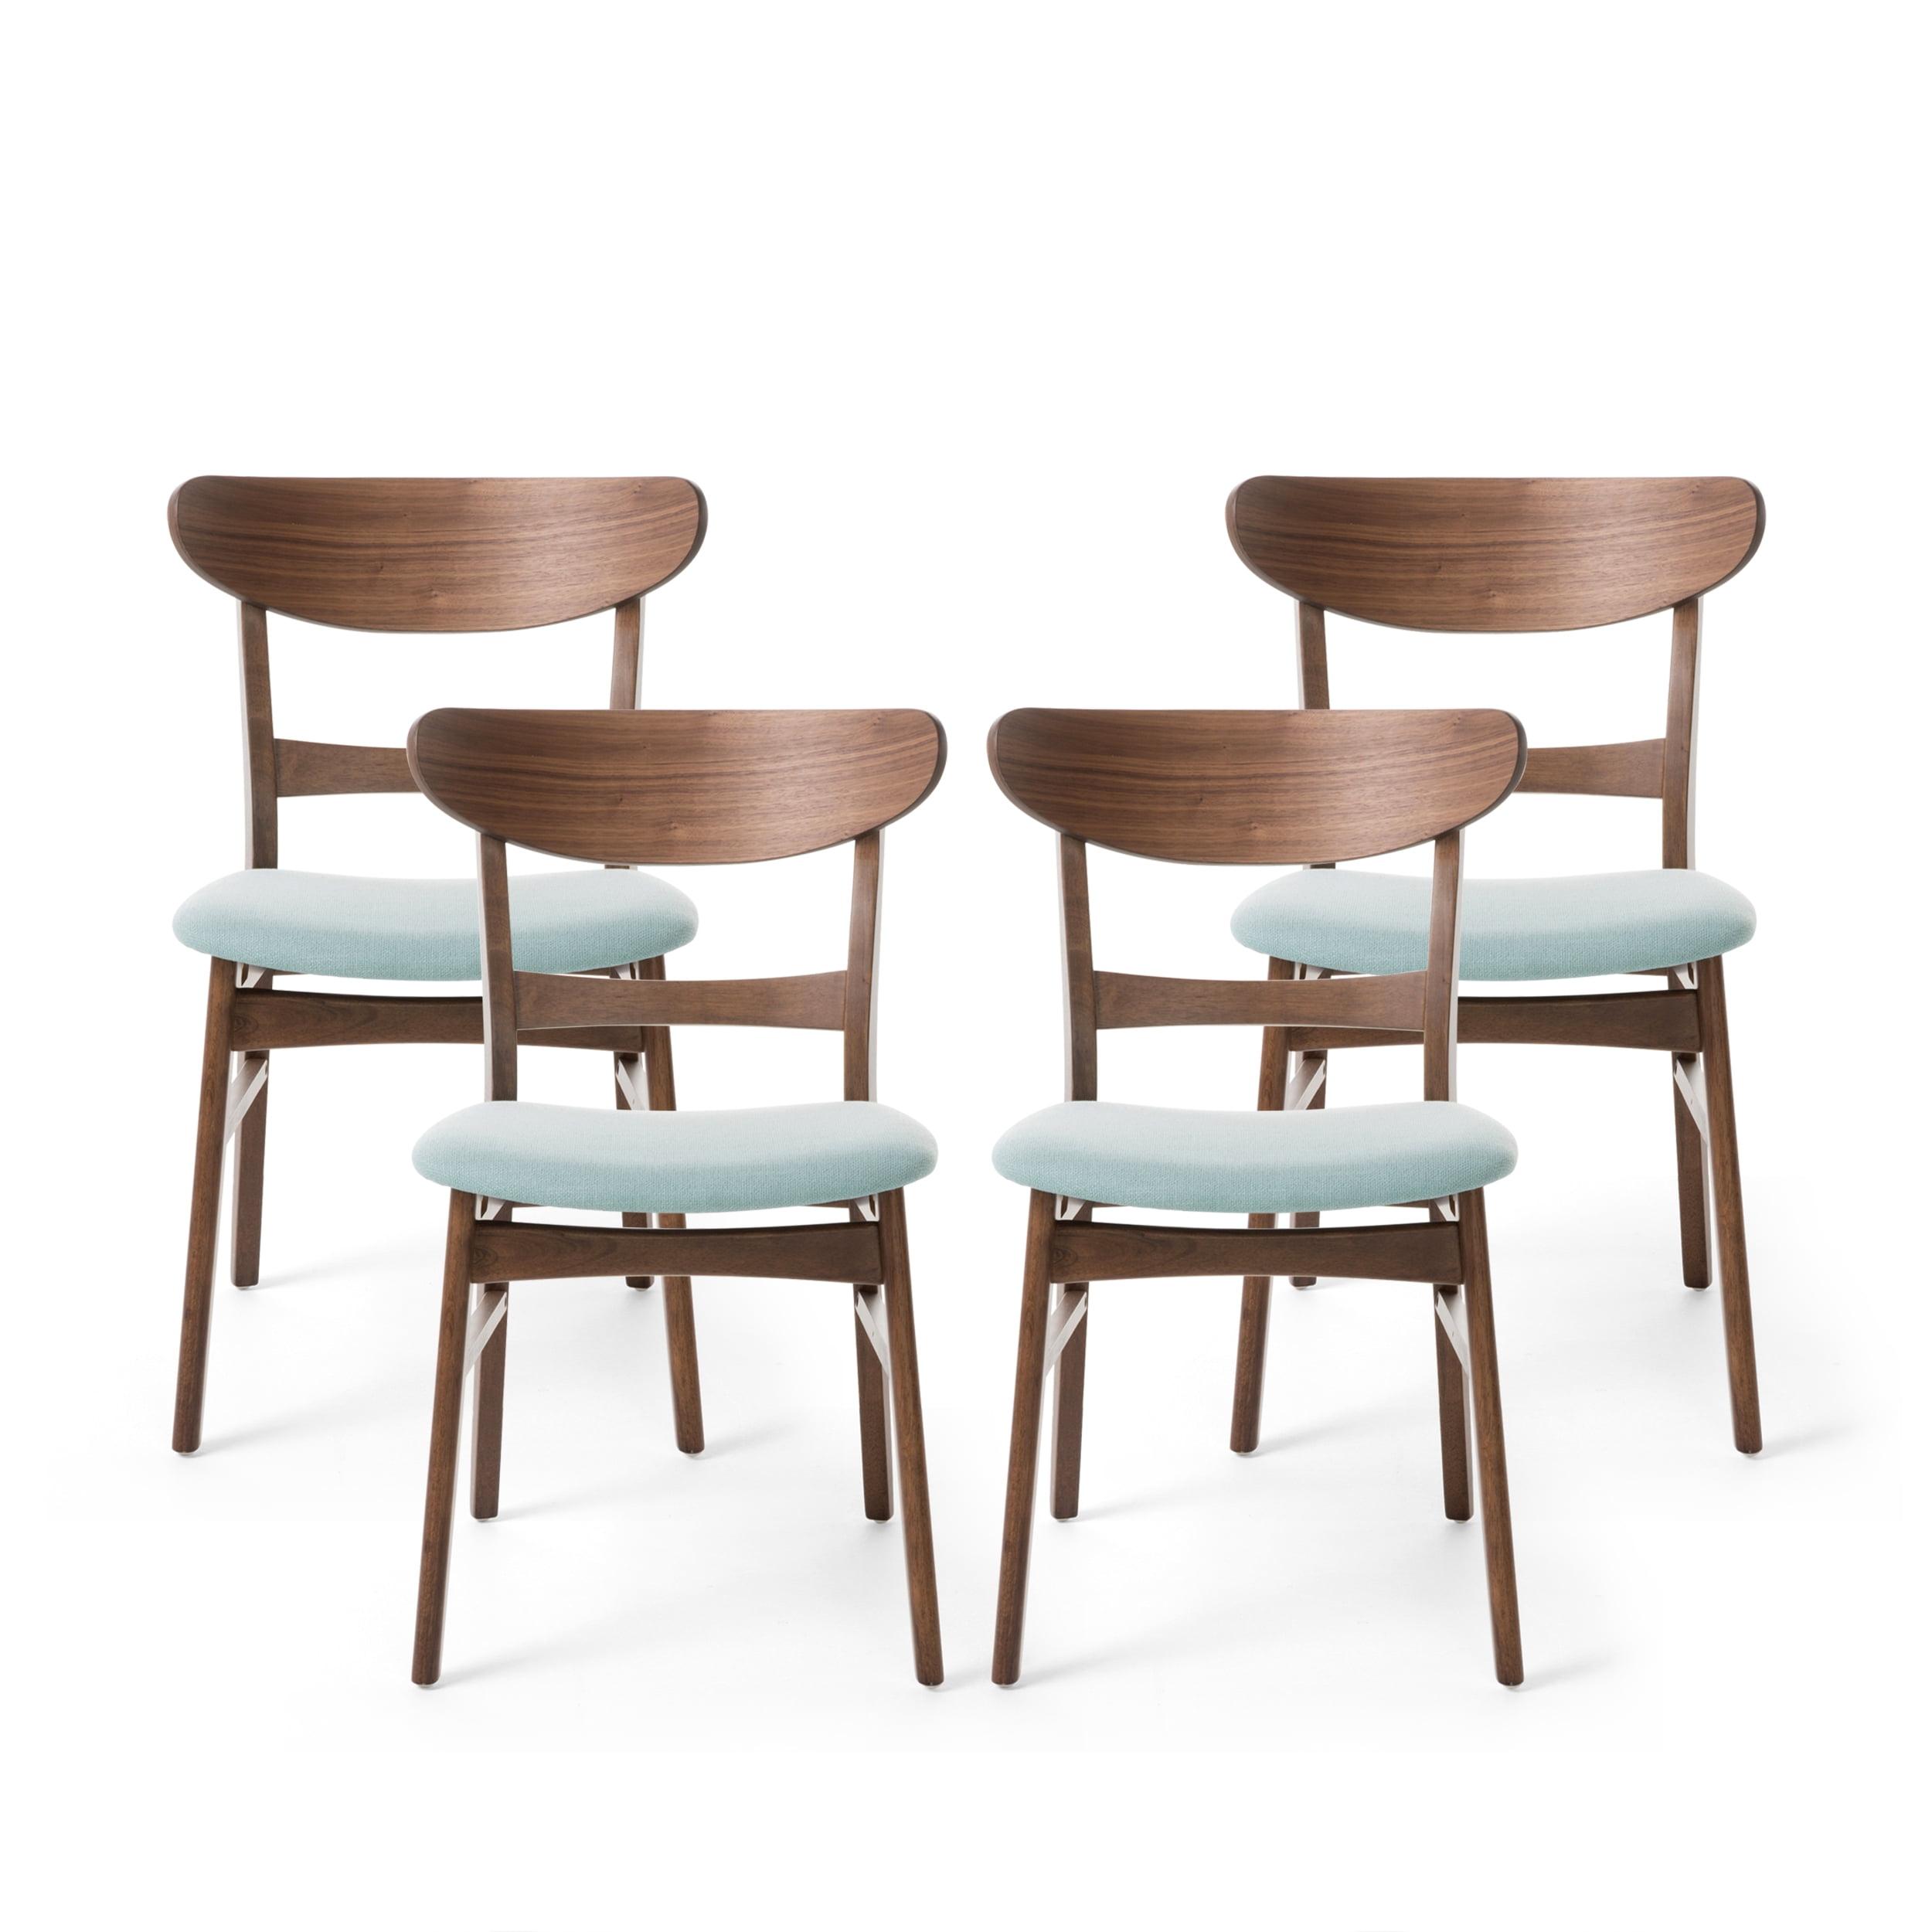 Mint and Walnut Mid-Century Ladderback Side Chair Set of 4